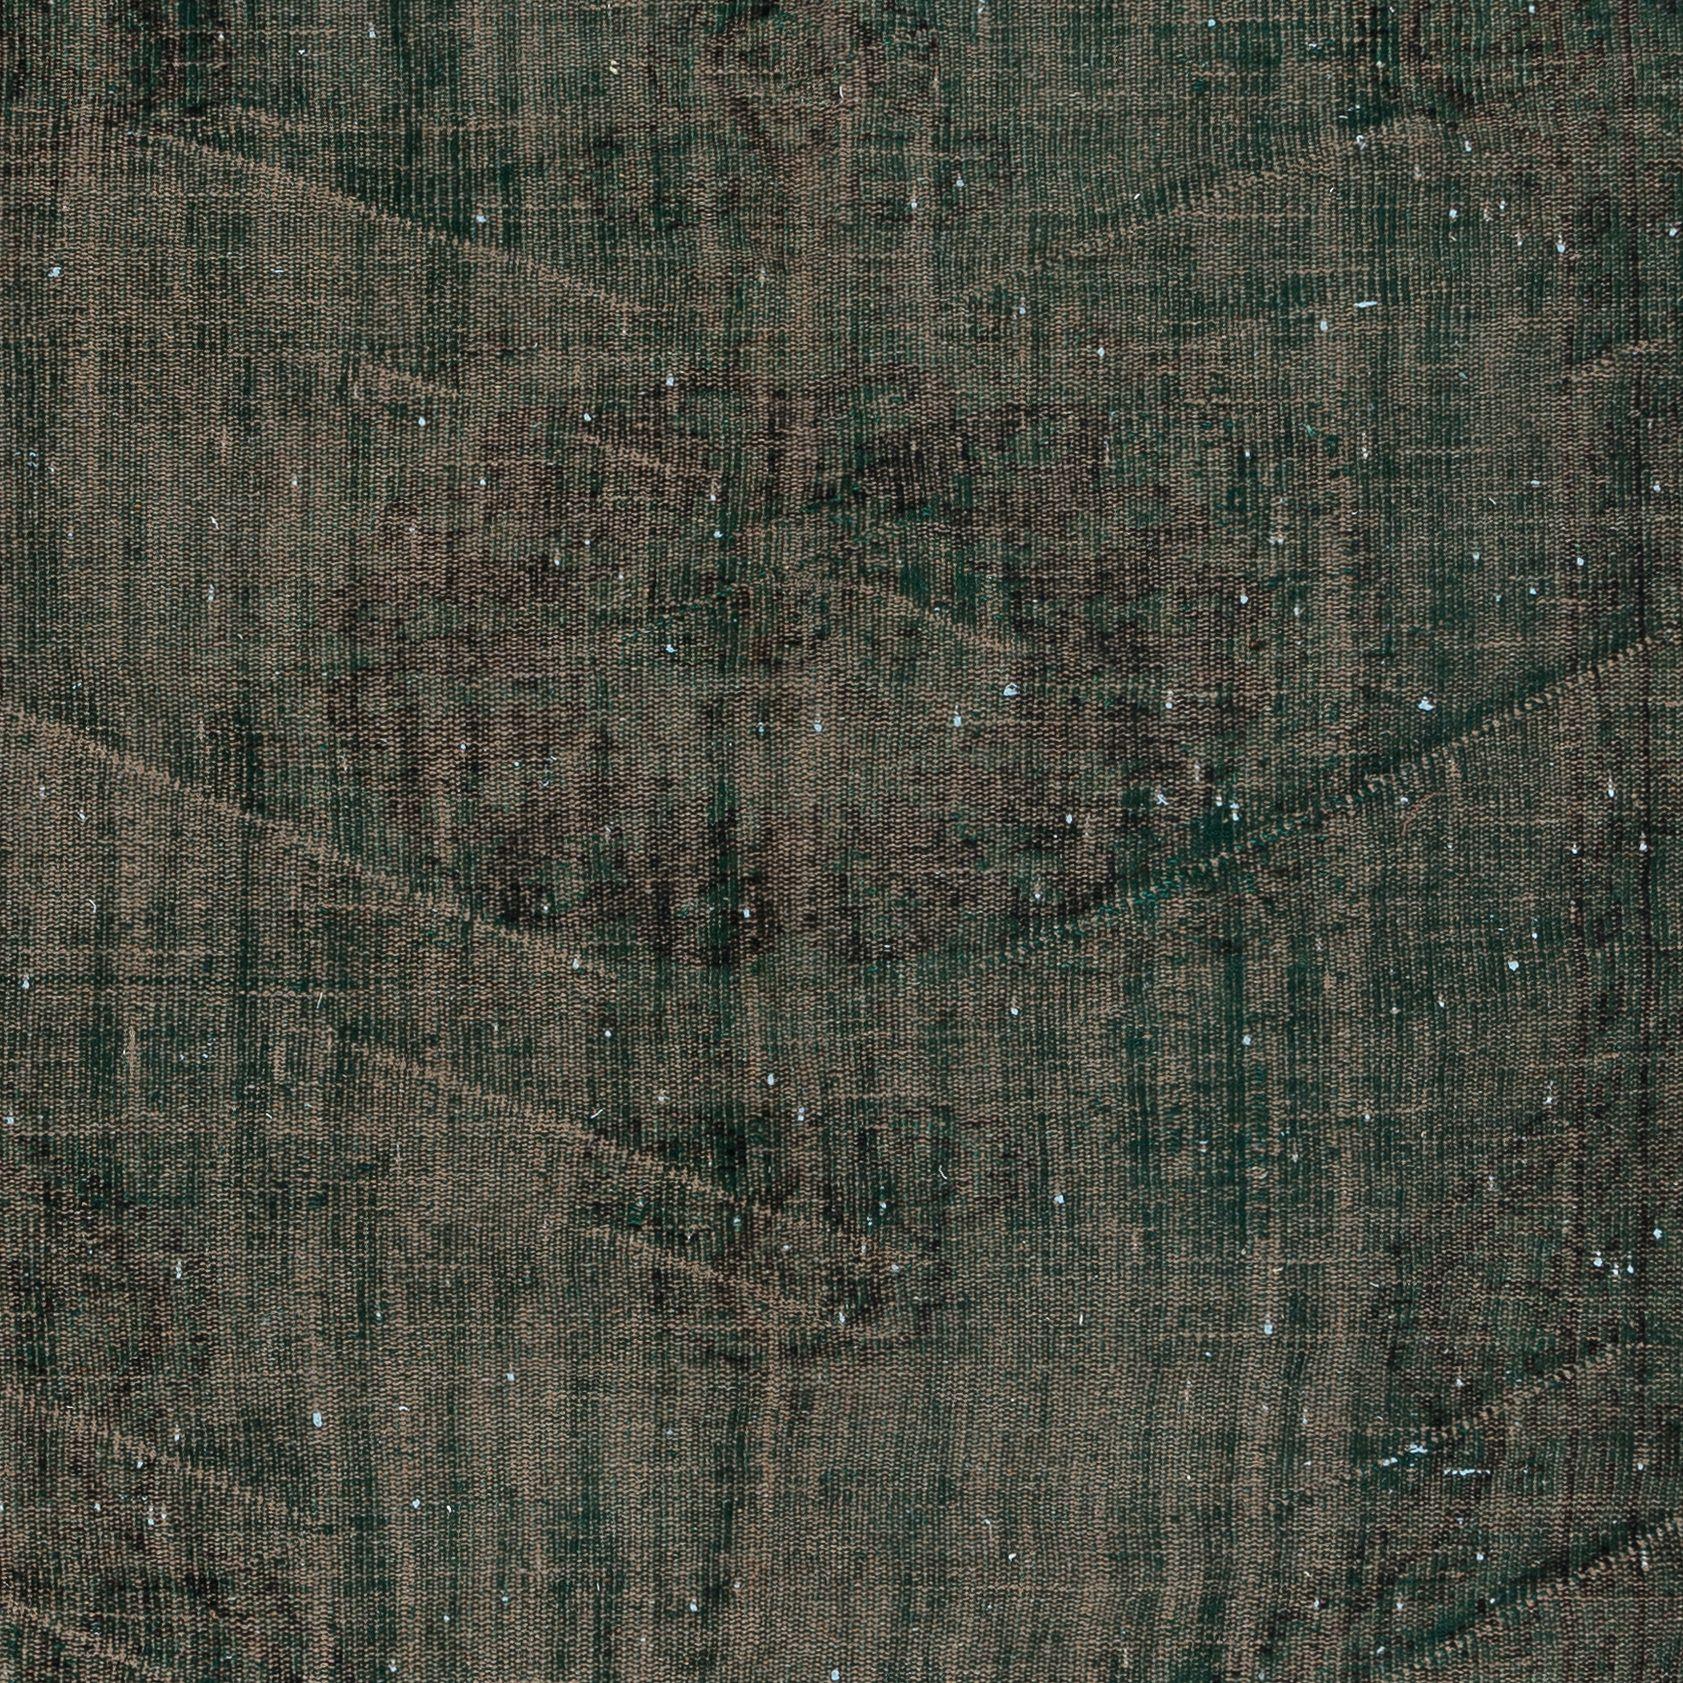 5.3x8.5 Ft Distressed Dark Green Rug, Handmade Turkish Shabby Chic Carpet In Good Condition For Sale In Philadelphia, PA